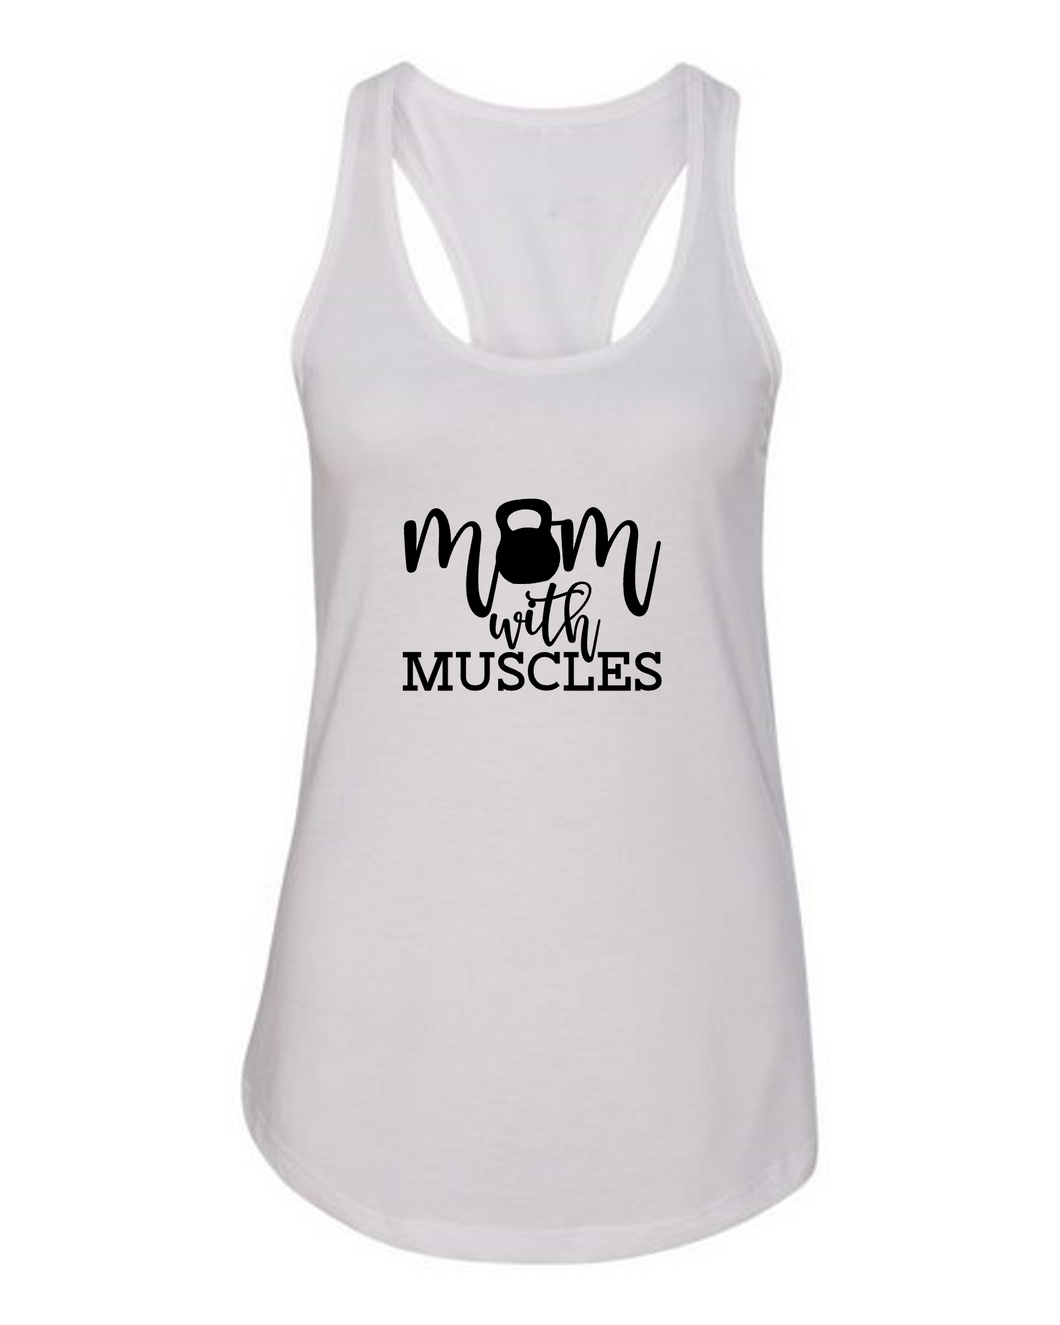 Mom with Muscles (Tank or Tee) – Acshun Activewear